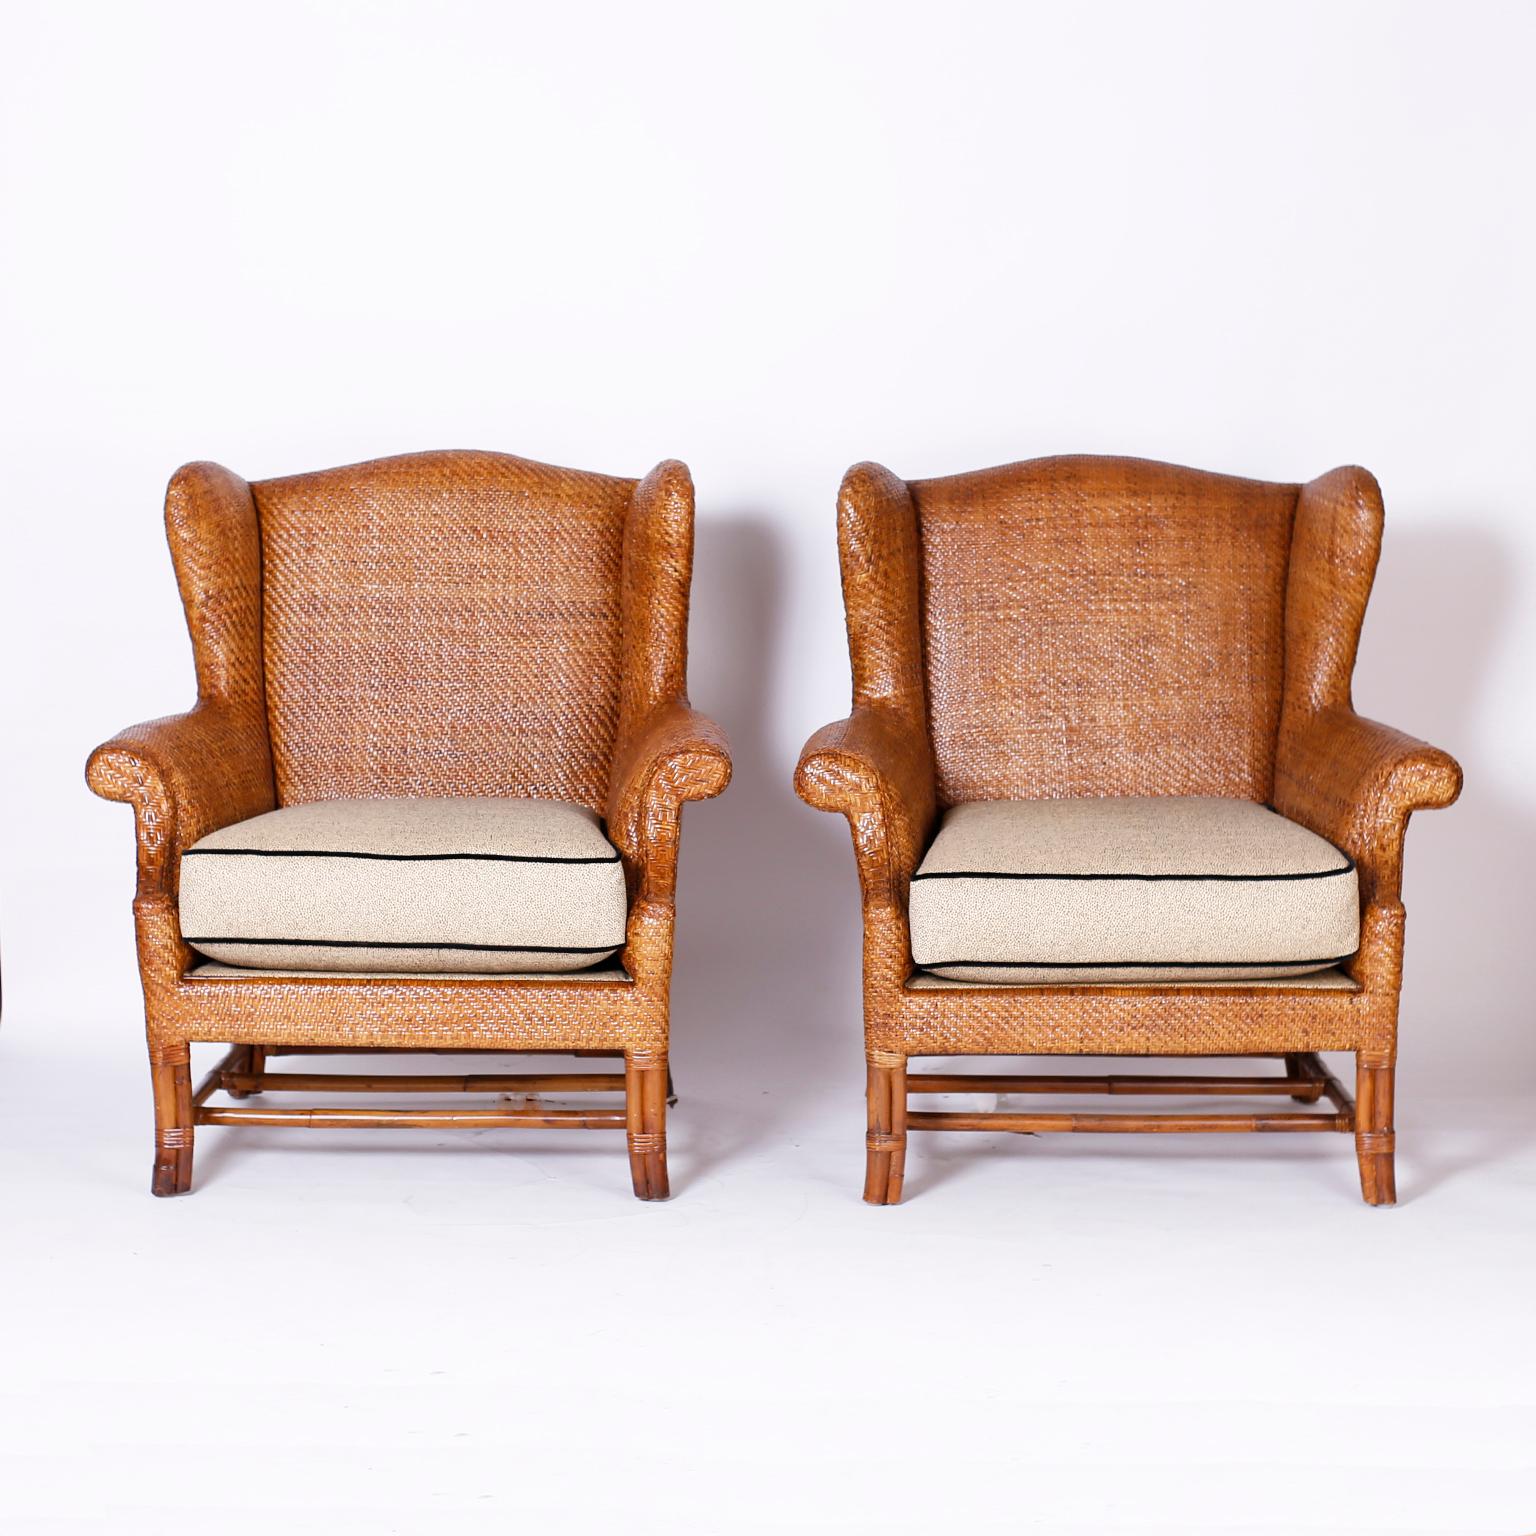 Pair of Midcentury Wicker Wingback Armchairs by Baker 2